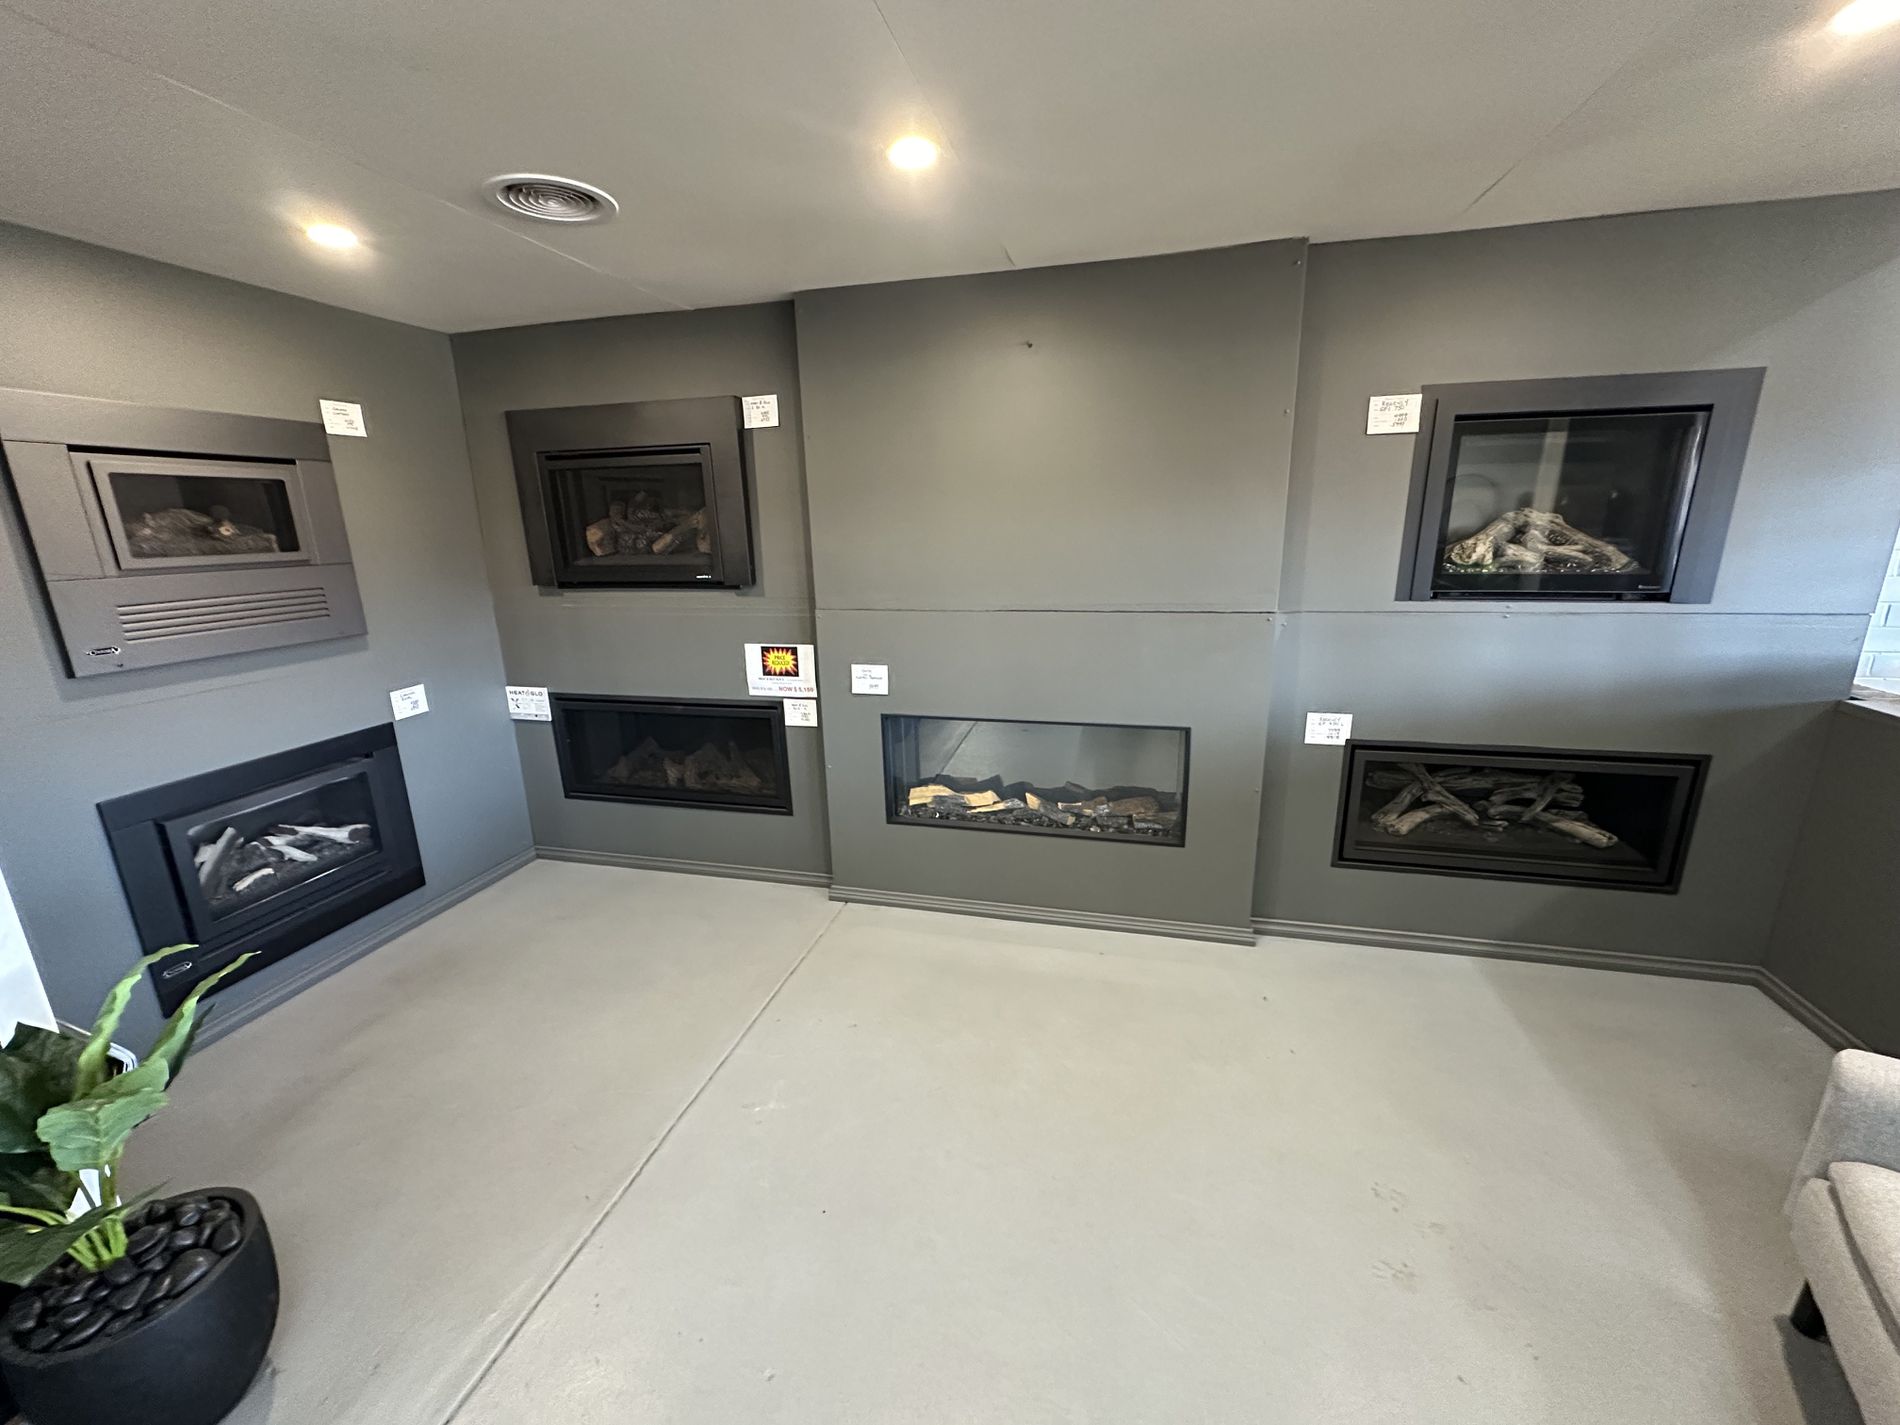 Retail Fireplaces/Gas Heaters Business for sale 